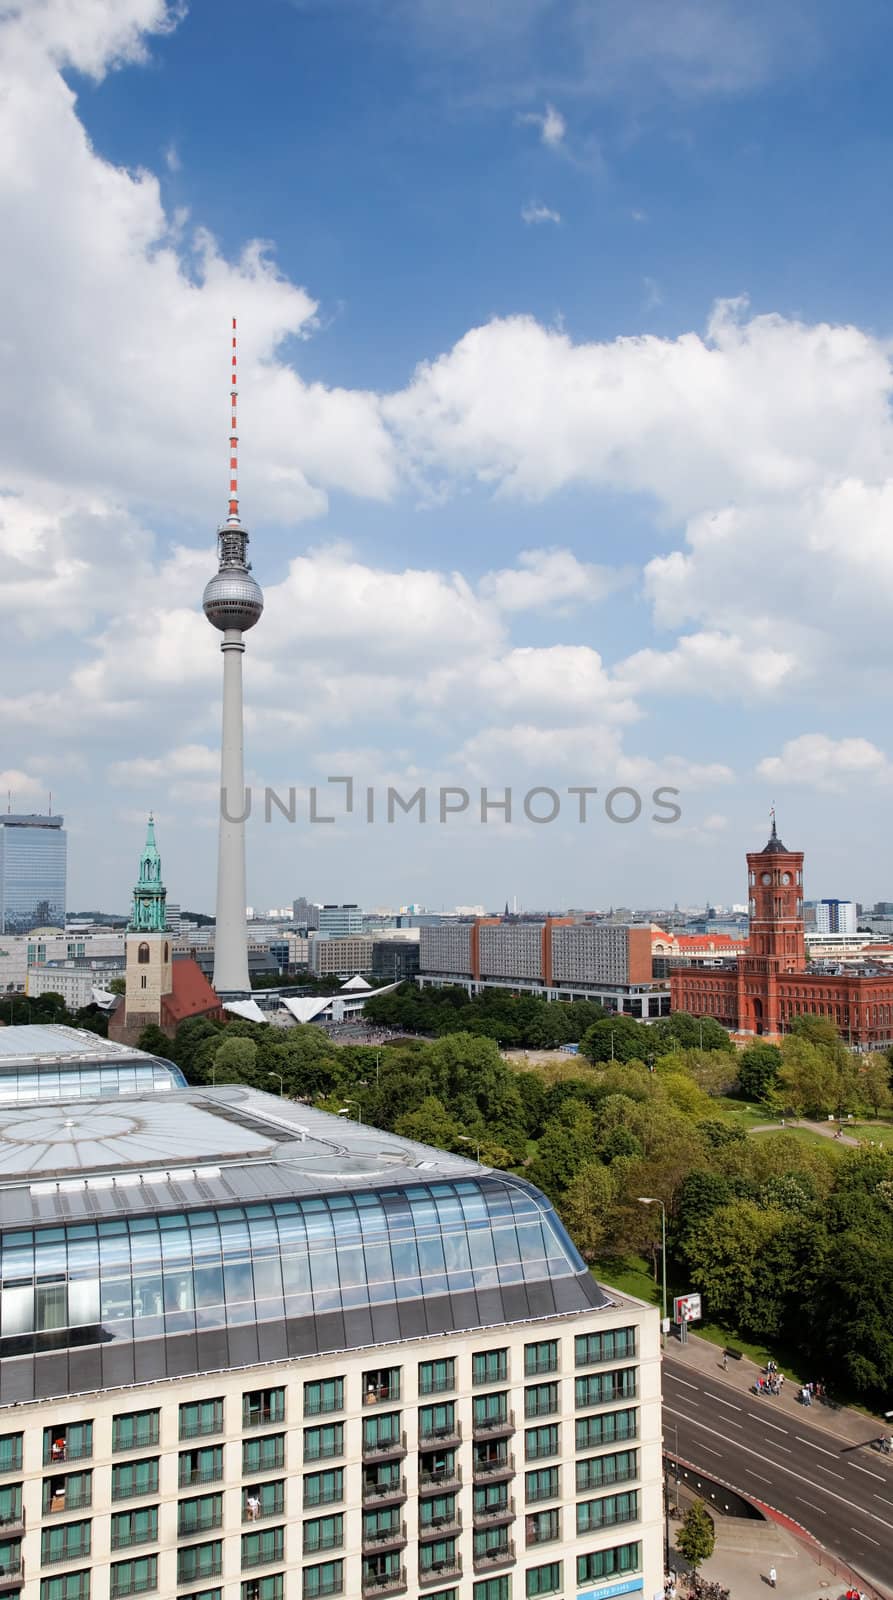 aerial view of central Berlin from the top of Berliner Dom
